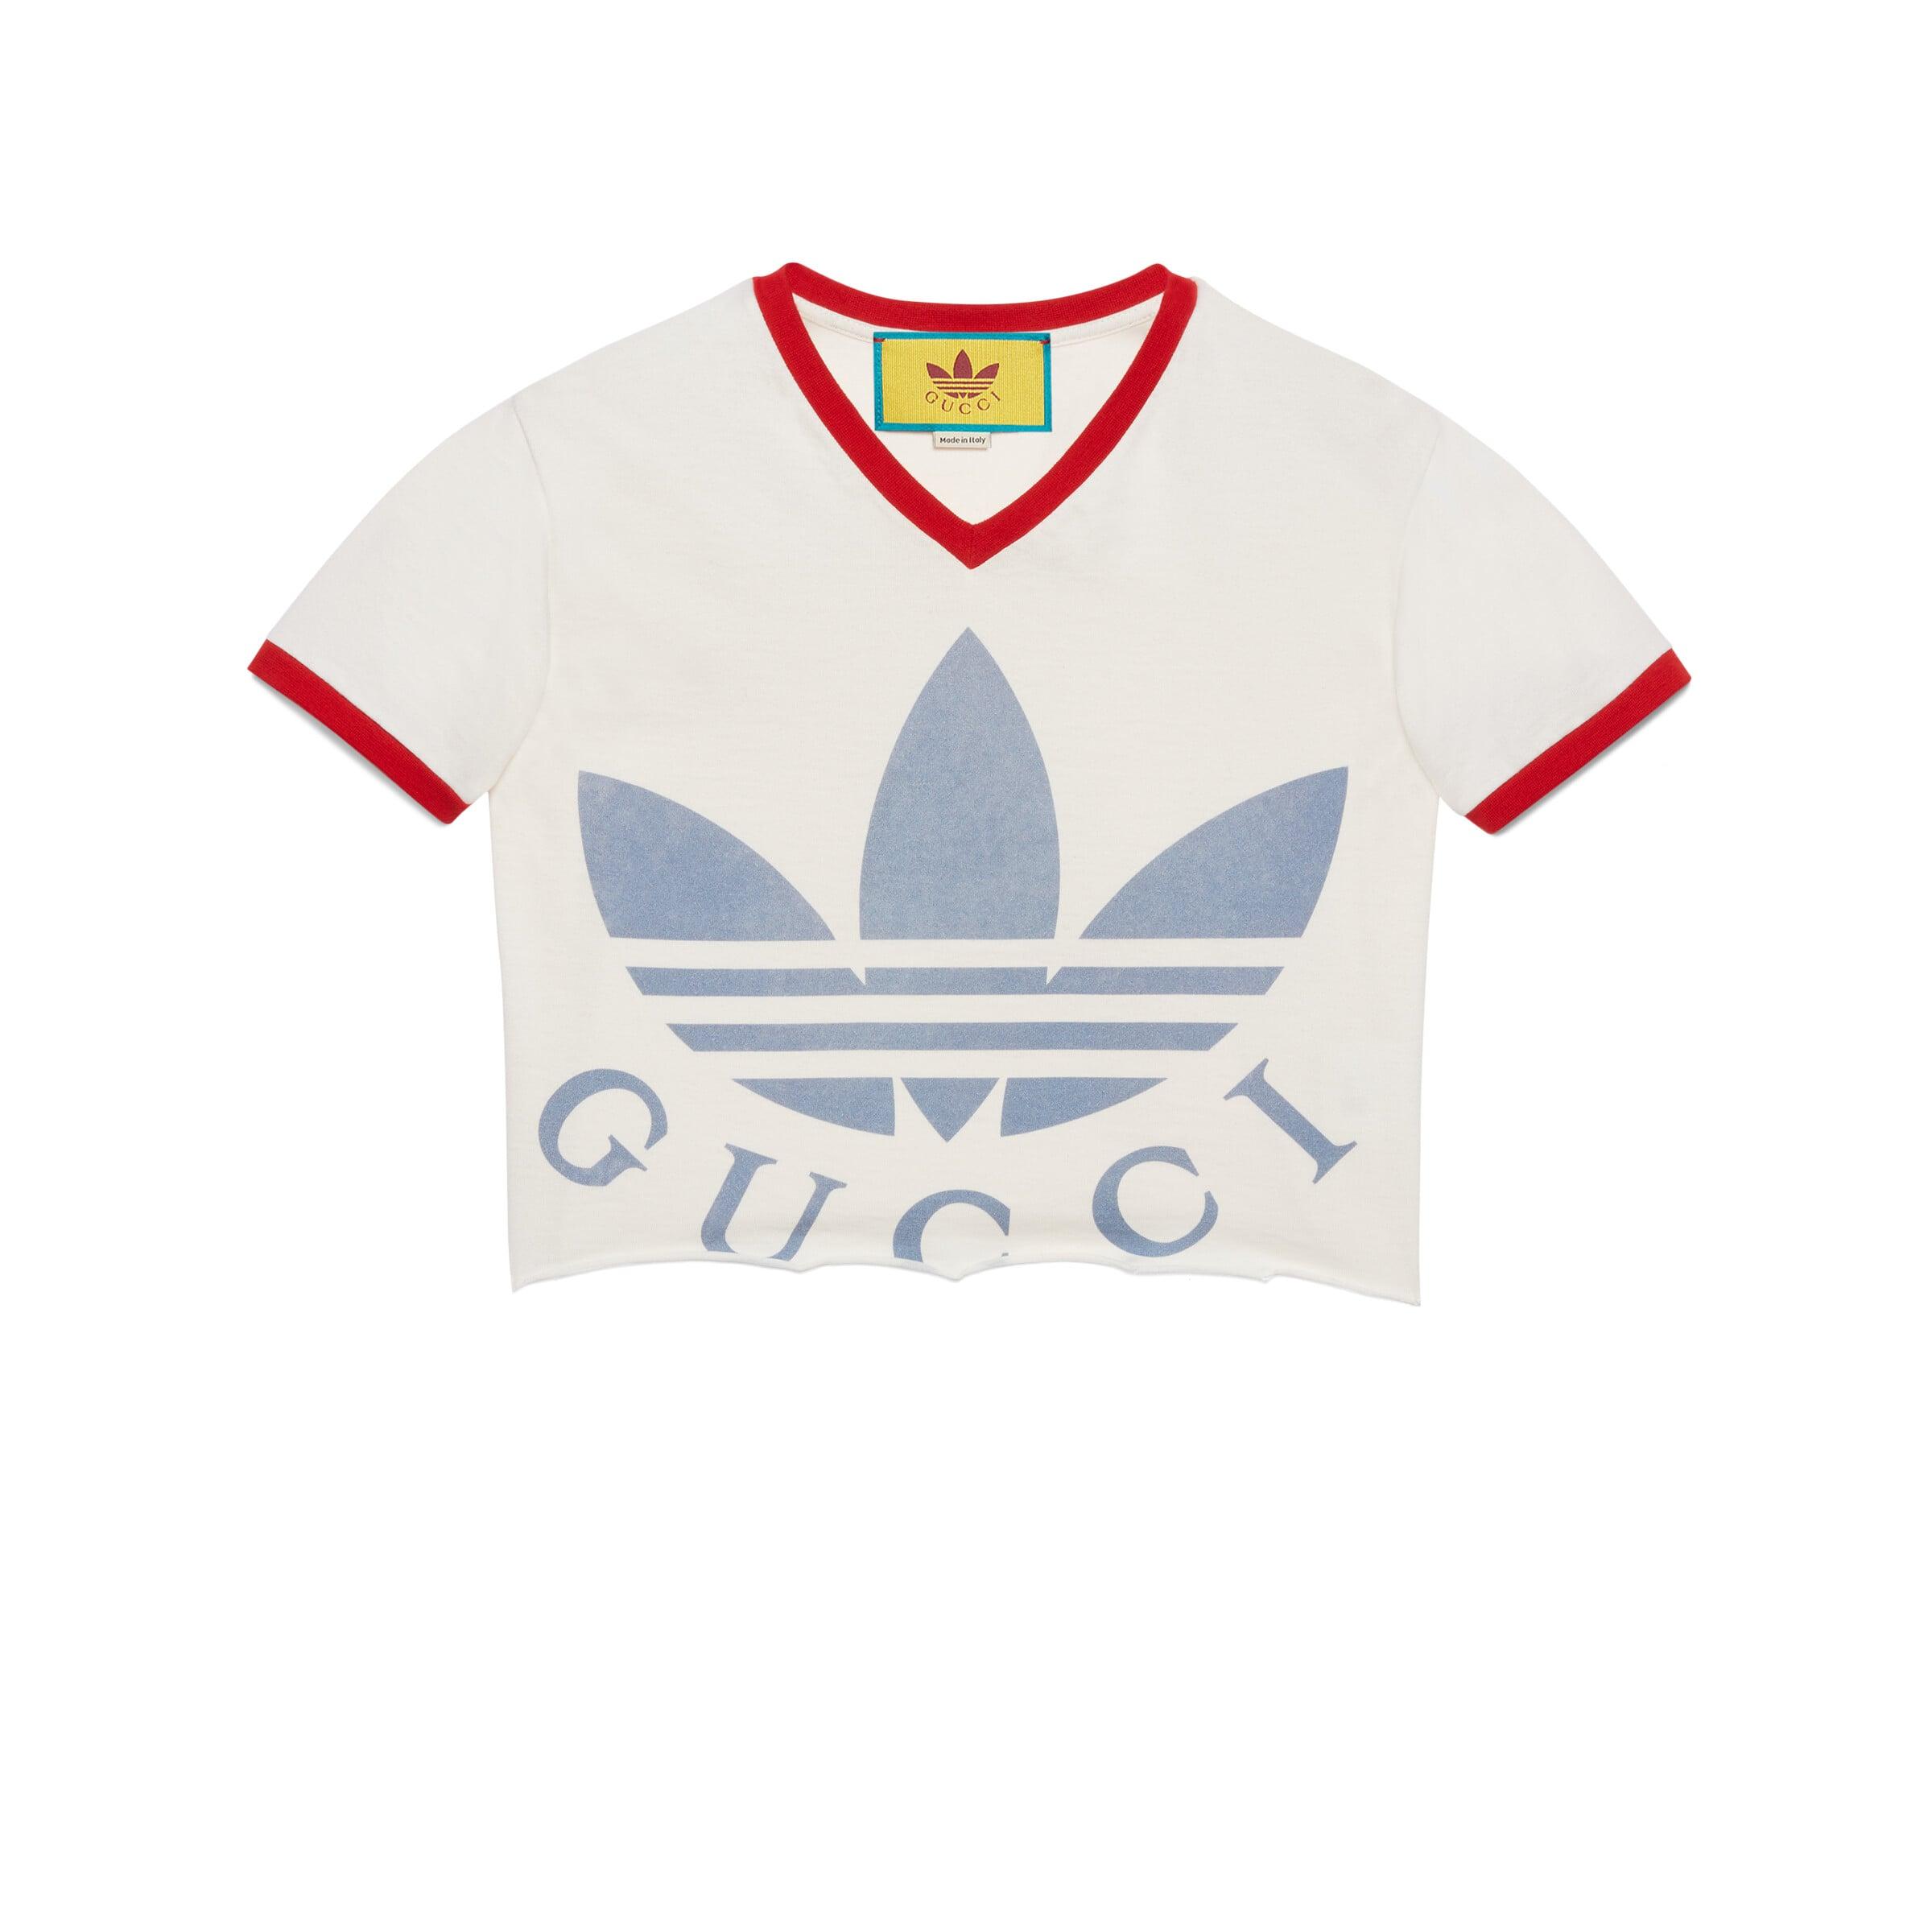 Cotton Jersey Cropped T Shirt in White - Gucci